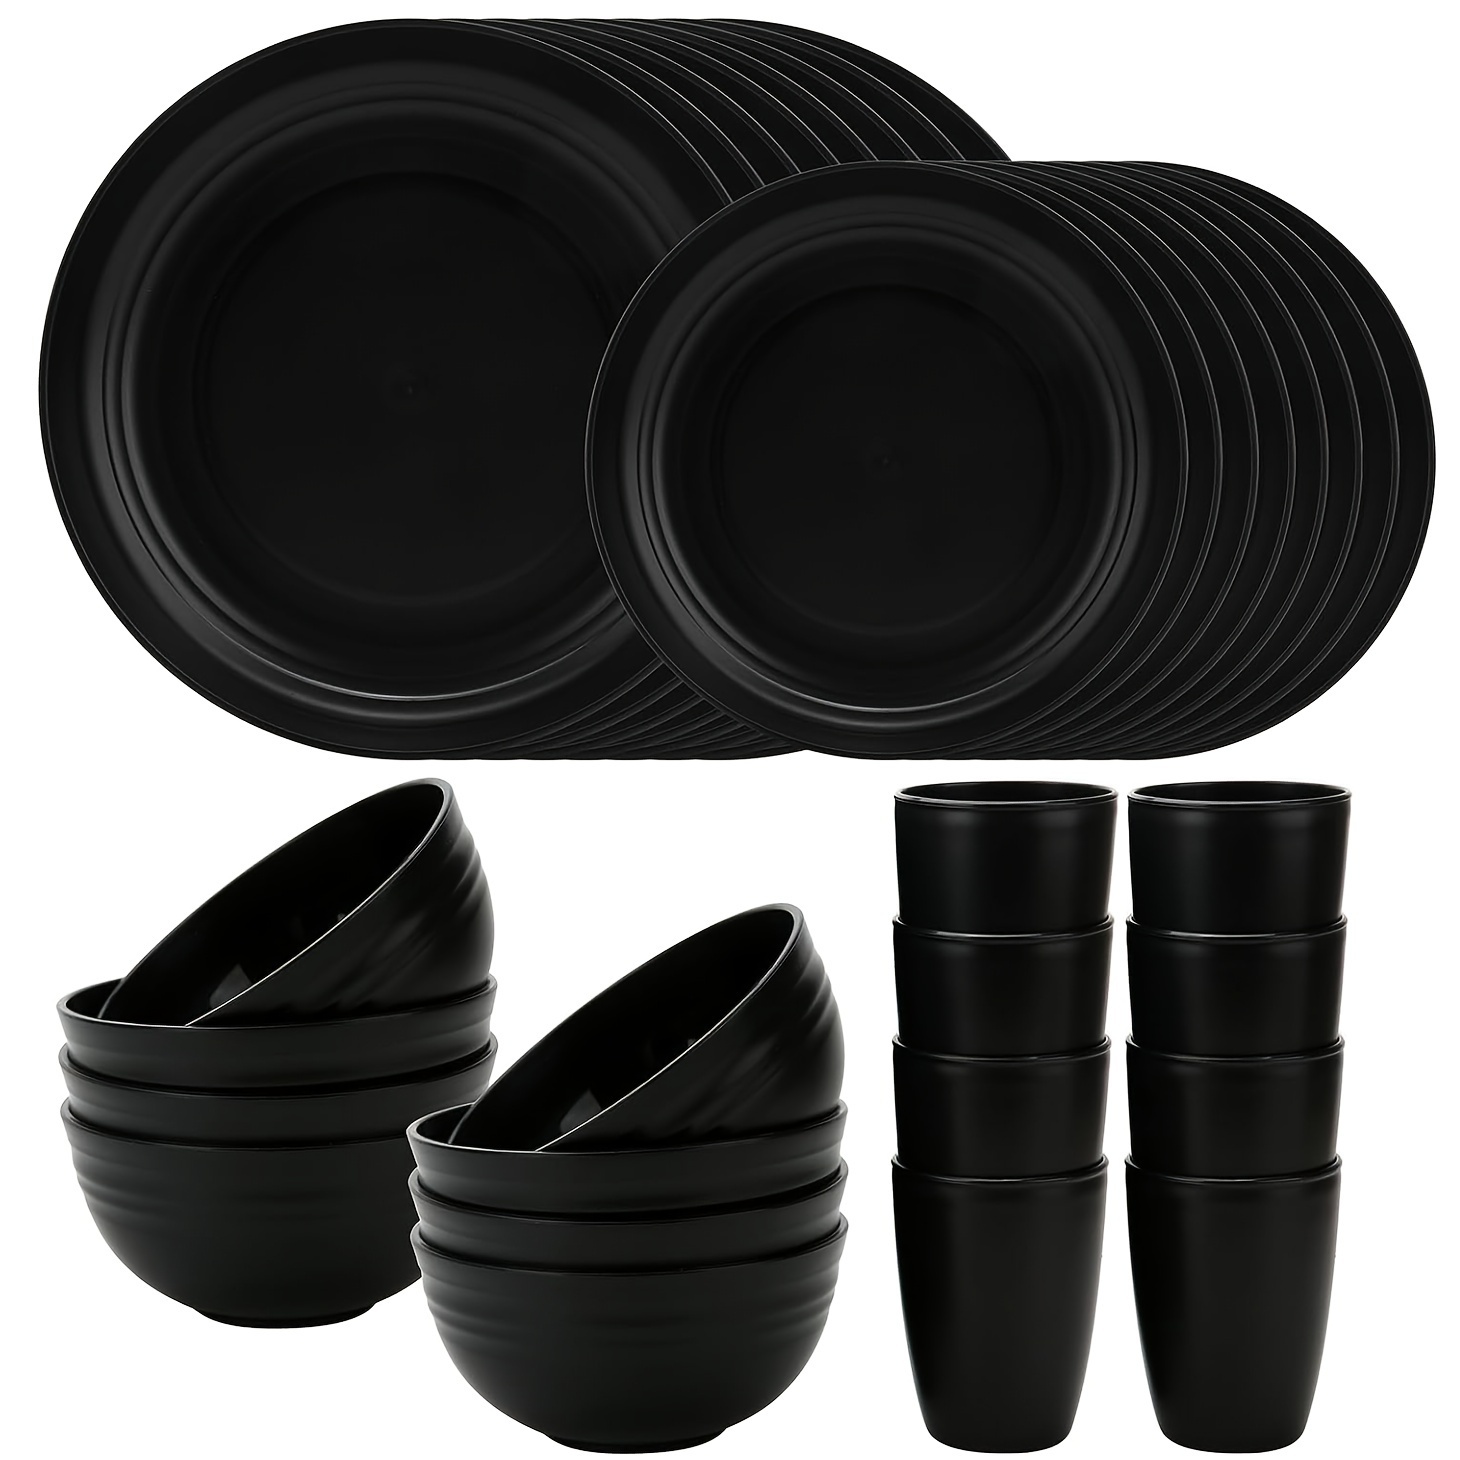 

32-piece Premium Plastic Dinnerware Set, Solid Pattern, Round Shape, Holiday Theme, Reusable Utensils, Microwave And Dishwasher Safe, Black Plates, Bowls, Cups For Indoor/outdoor Camping